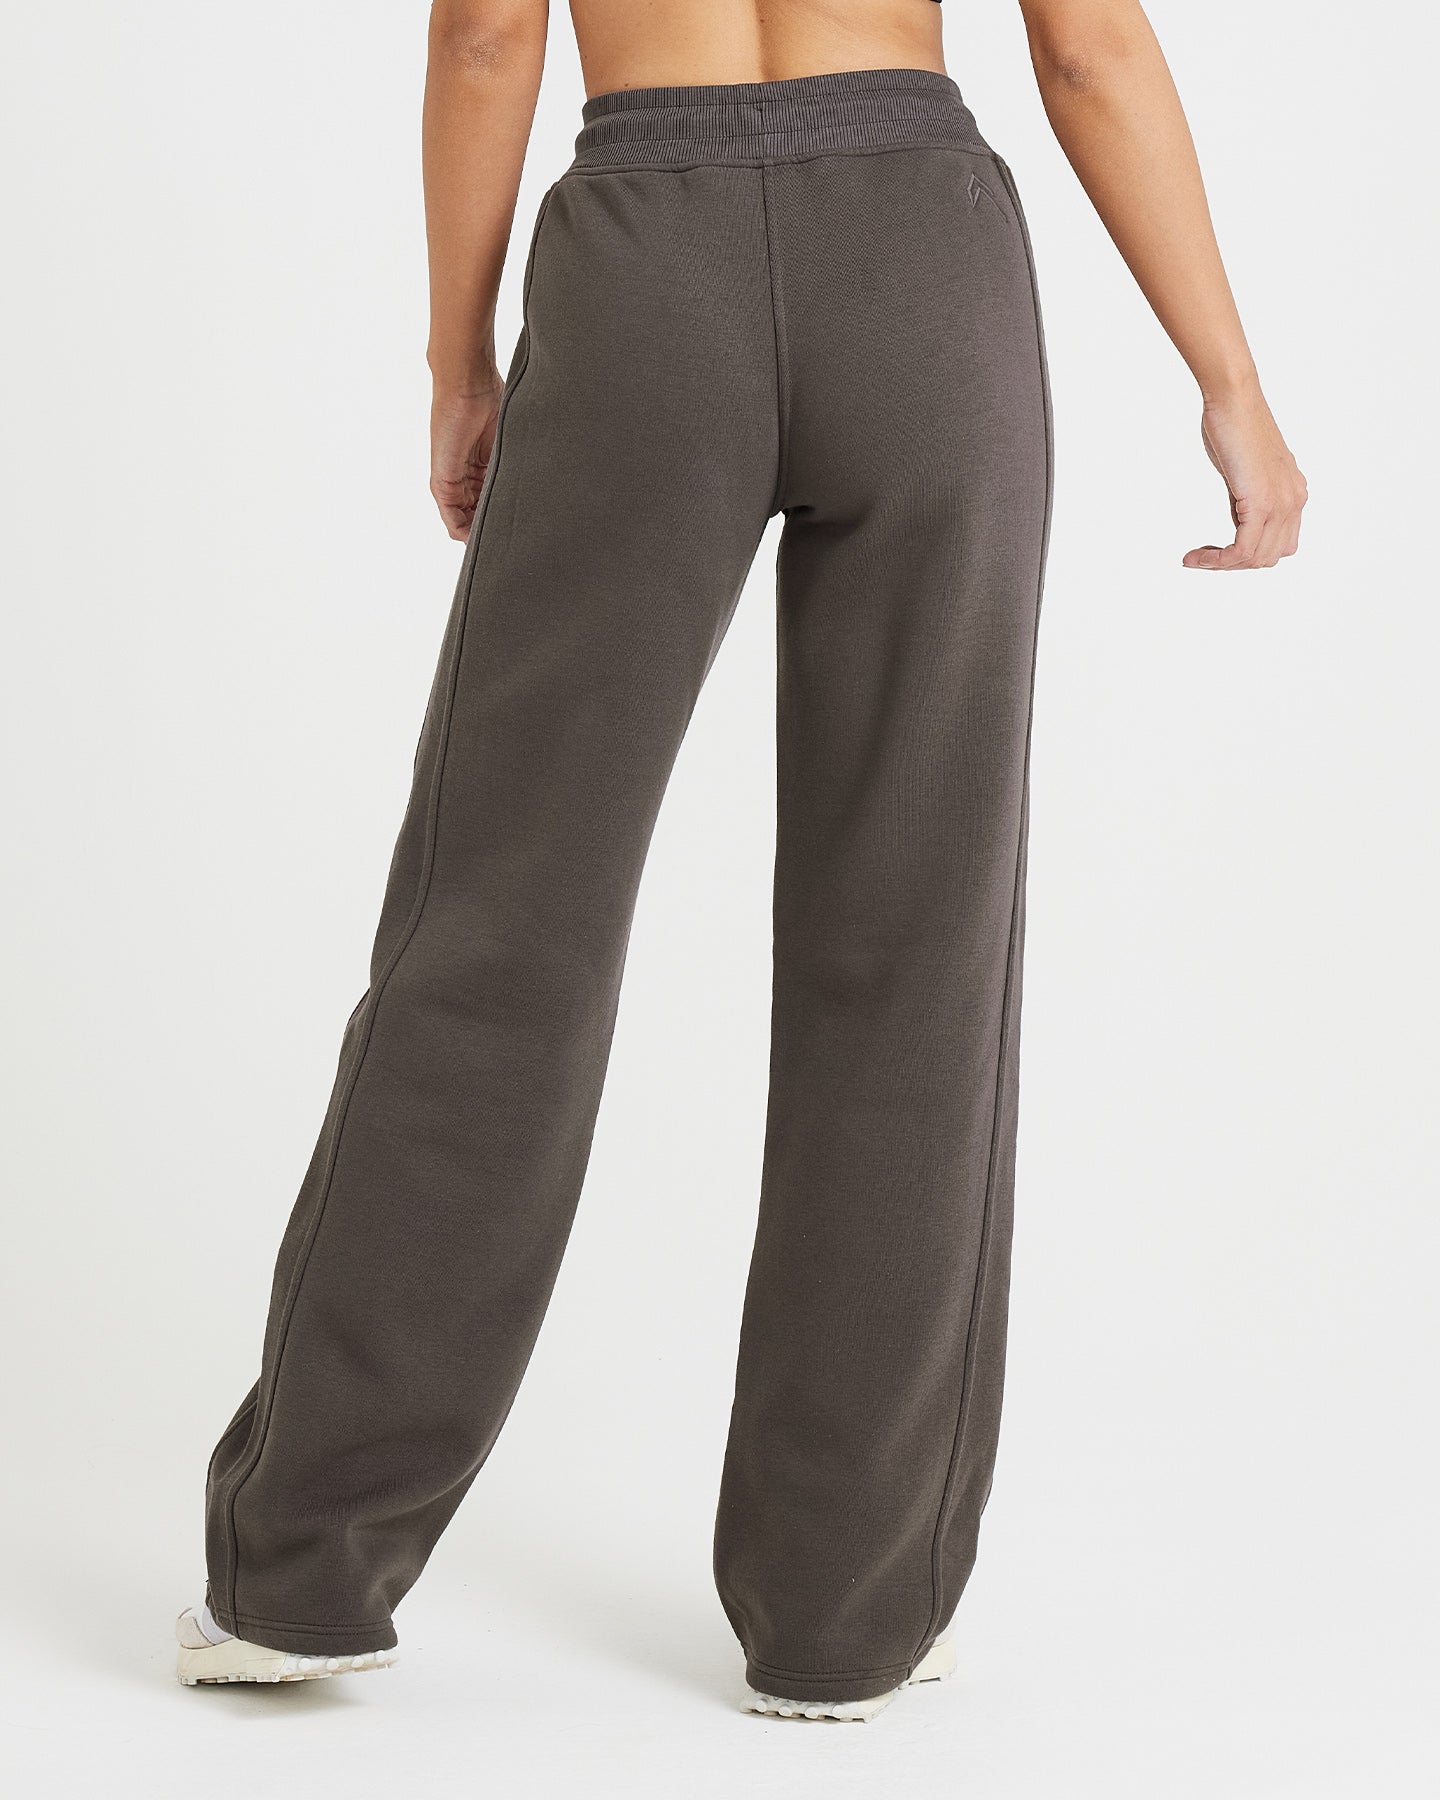  Oalka Women's Straight Leg Lounge Golf Pants with Deep Pockets  Sweatpants 29 Inches Nut Brown XS : Clothing, Shoes & Jewelry